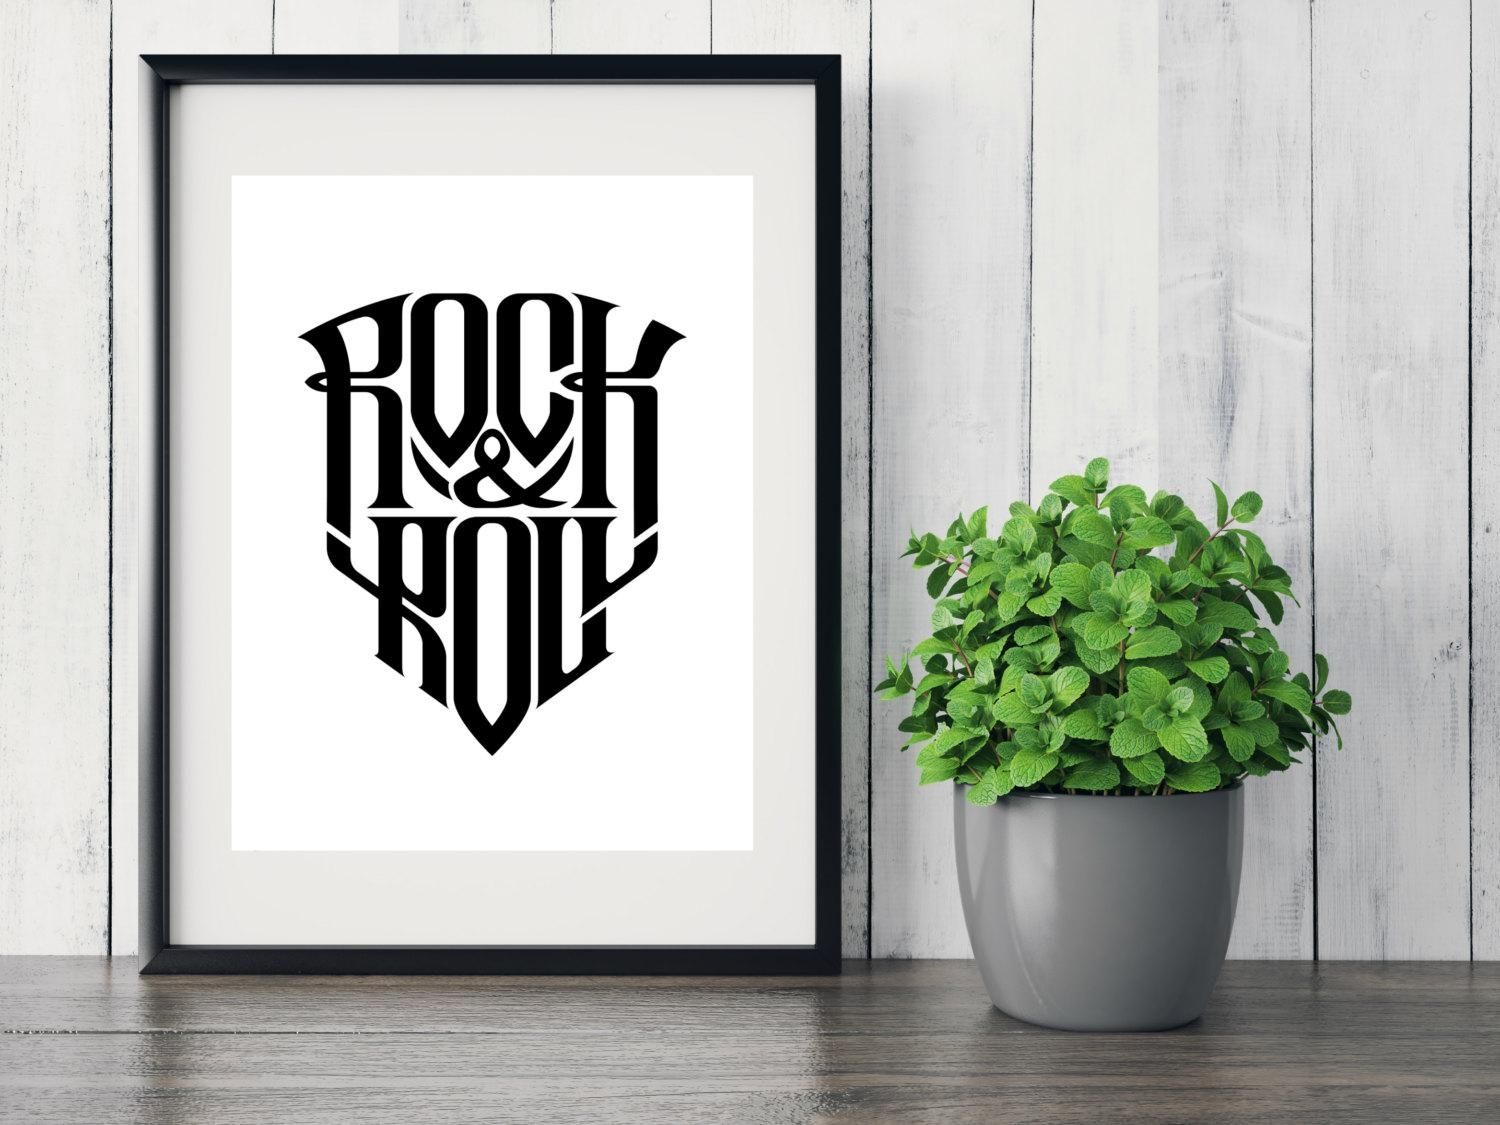 Rock N Roll! Wall Art Home Decor  Rock And Roll Art, Rock And Roll Regarding Rock And Roll Wall Art (View 18 of 20)